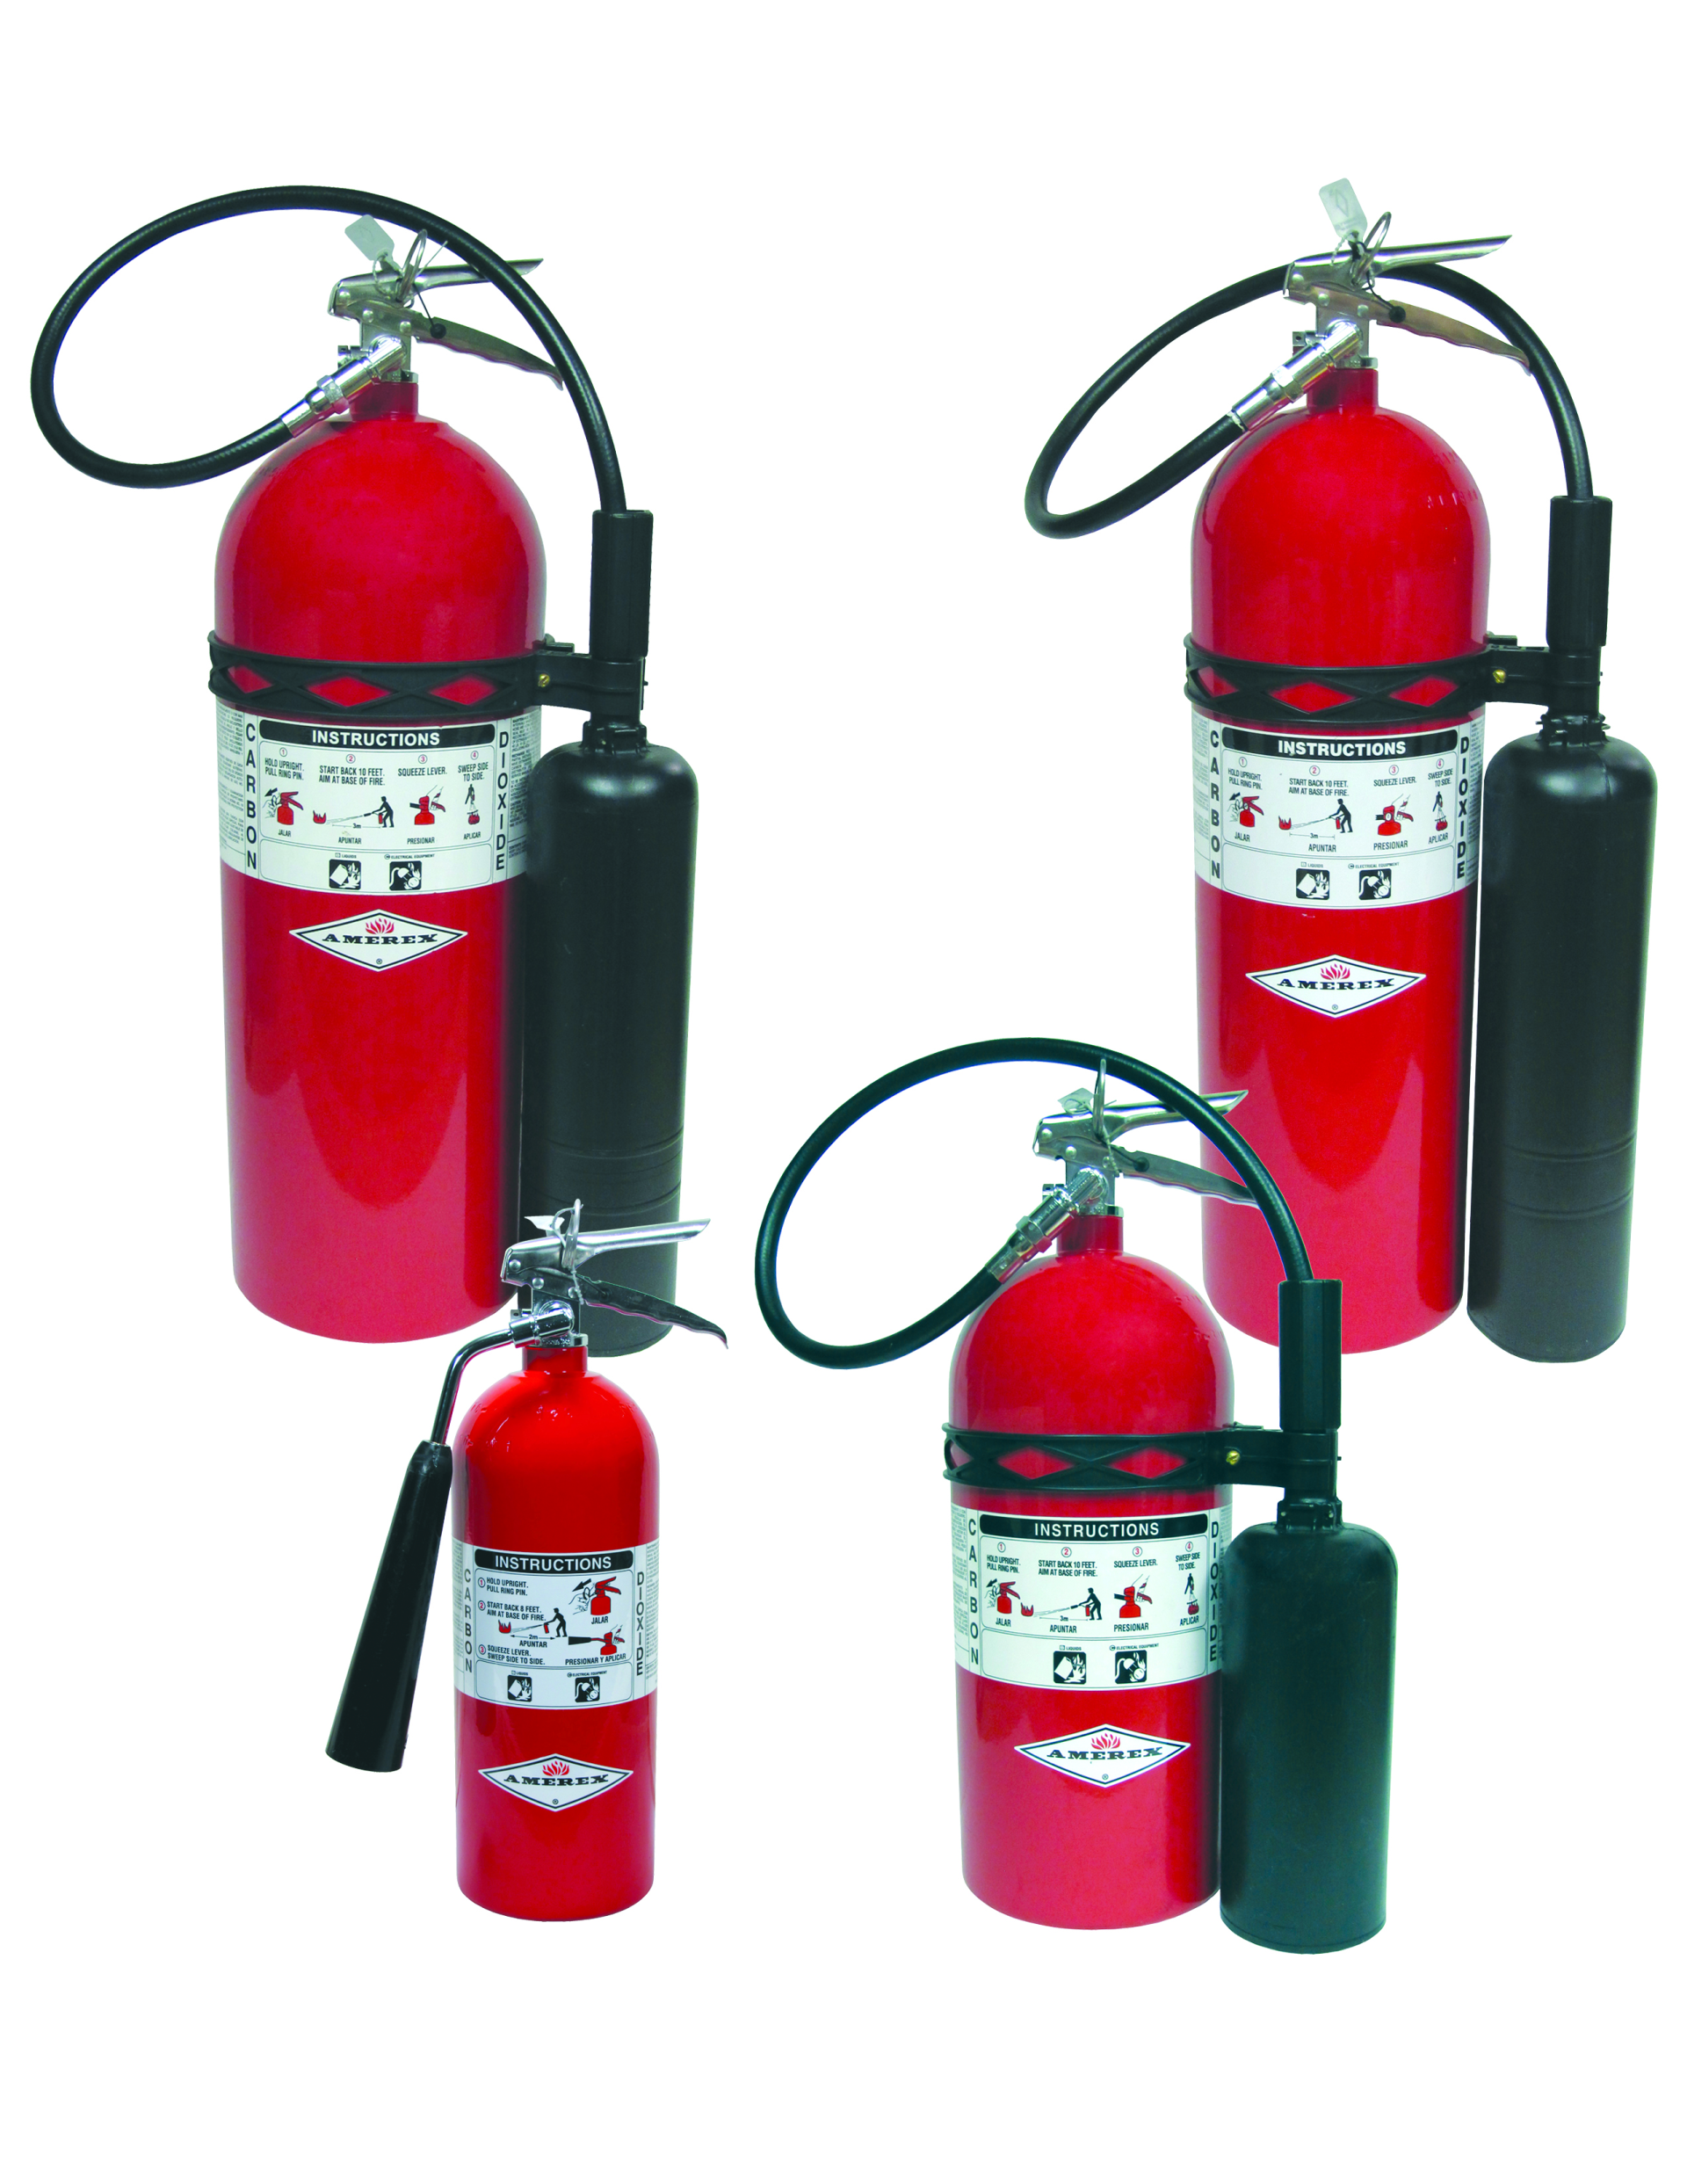 Fire extinguishers for sale in Nassau County, NY